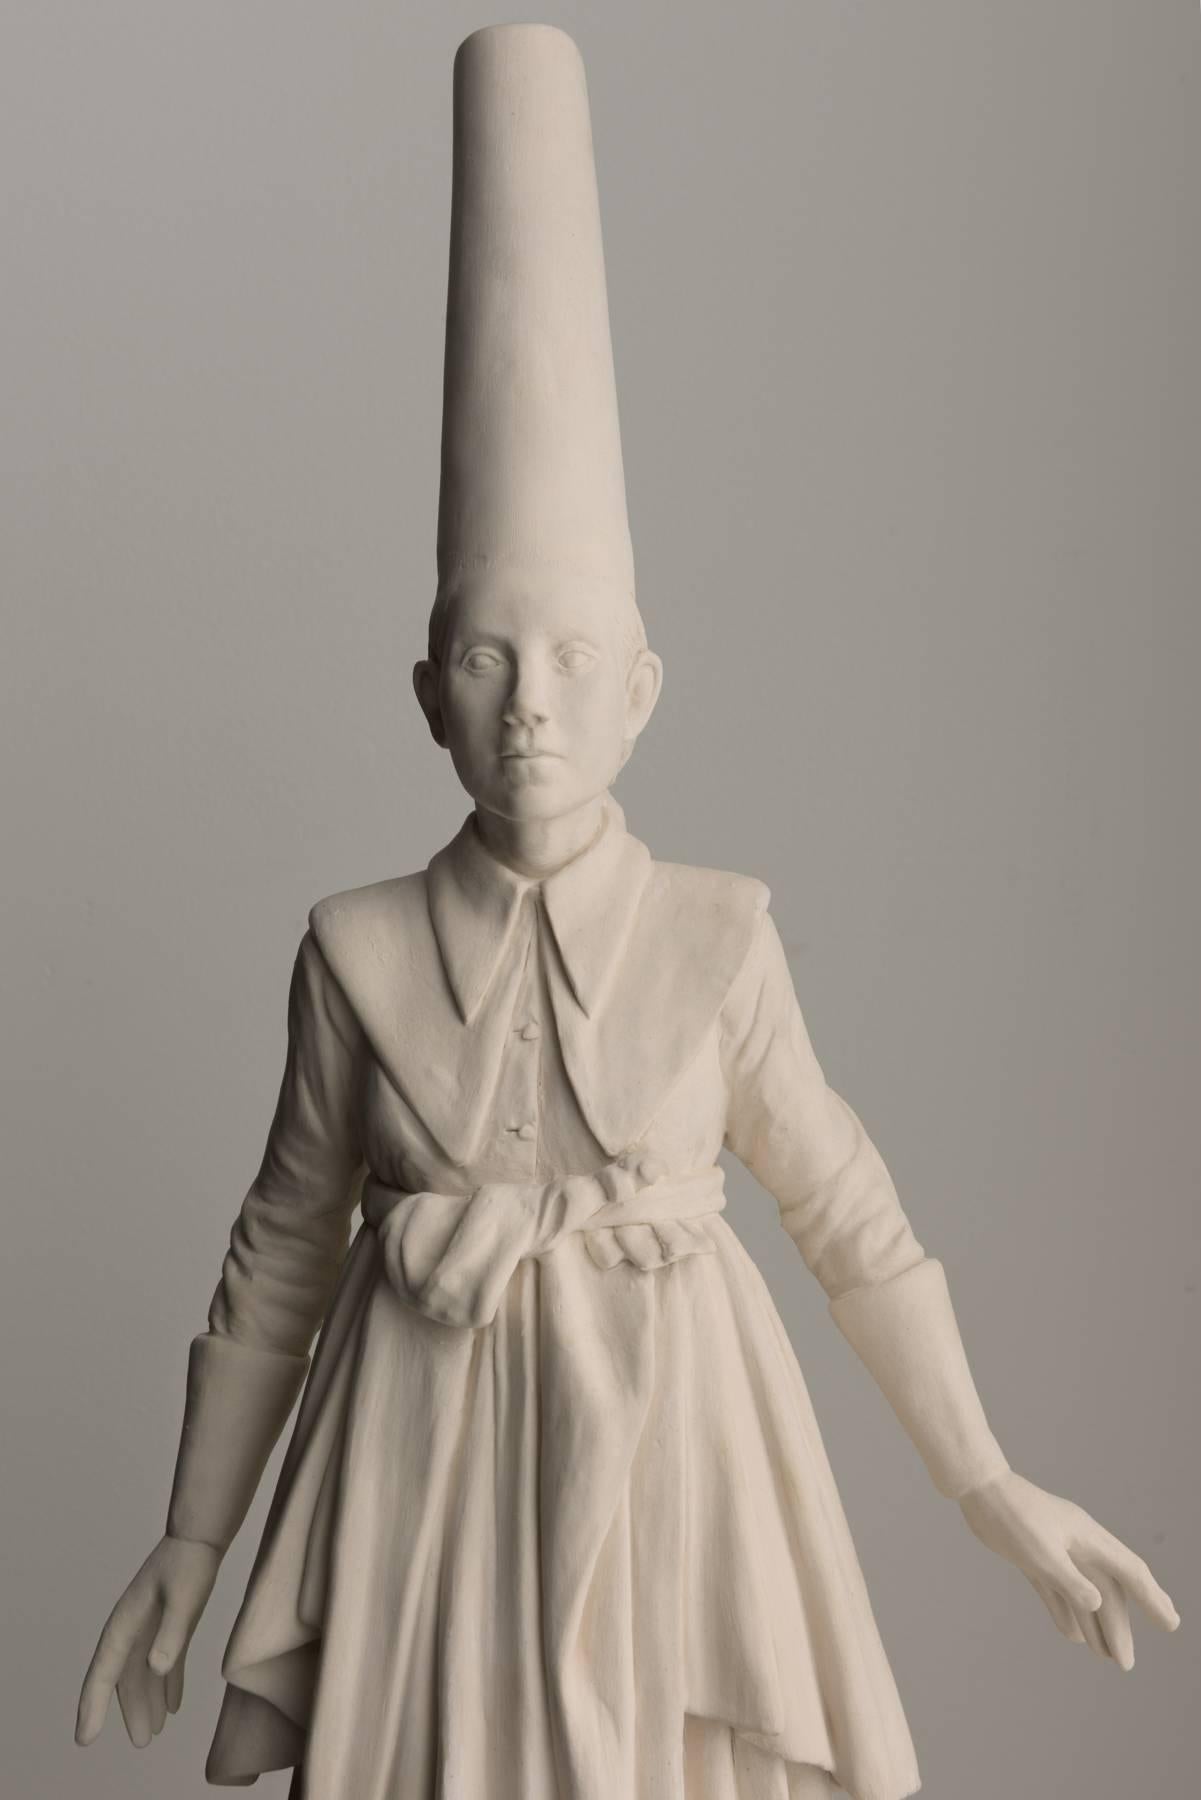 Sudden Novice of the Judy Hat - Sculpture by Tricia Cline